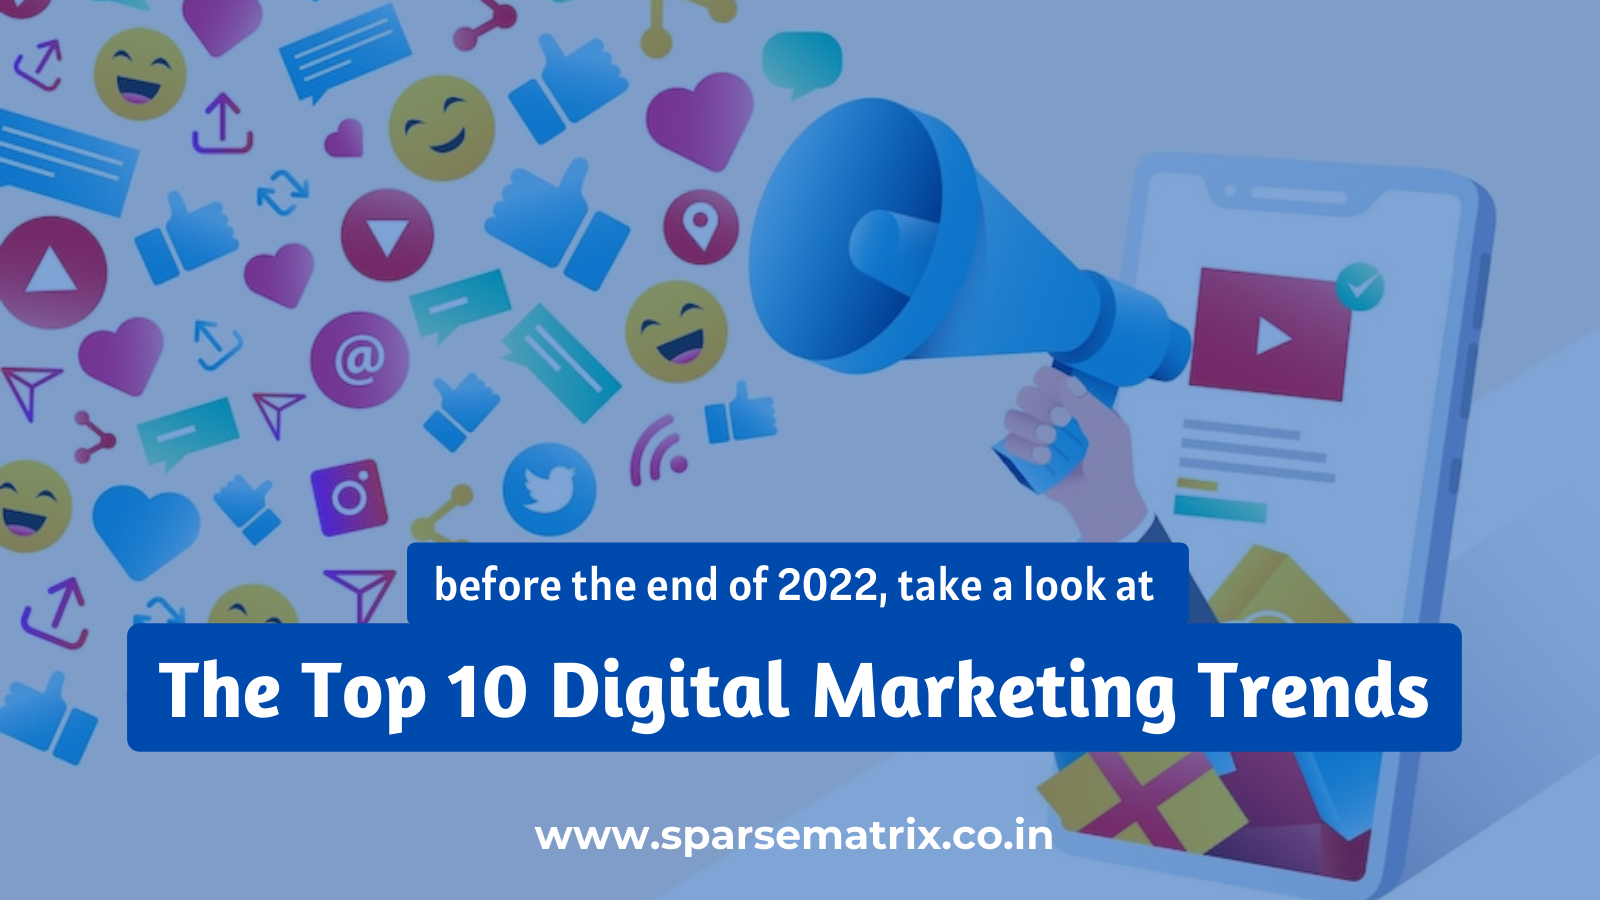 Before the end of 2022, take a look at The Top 10 Digital Marketing Trends.